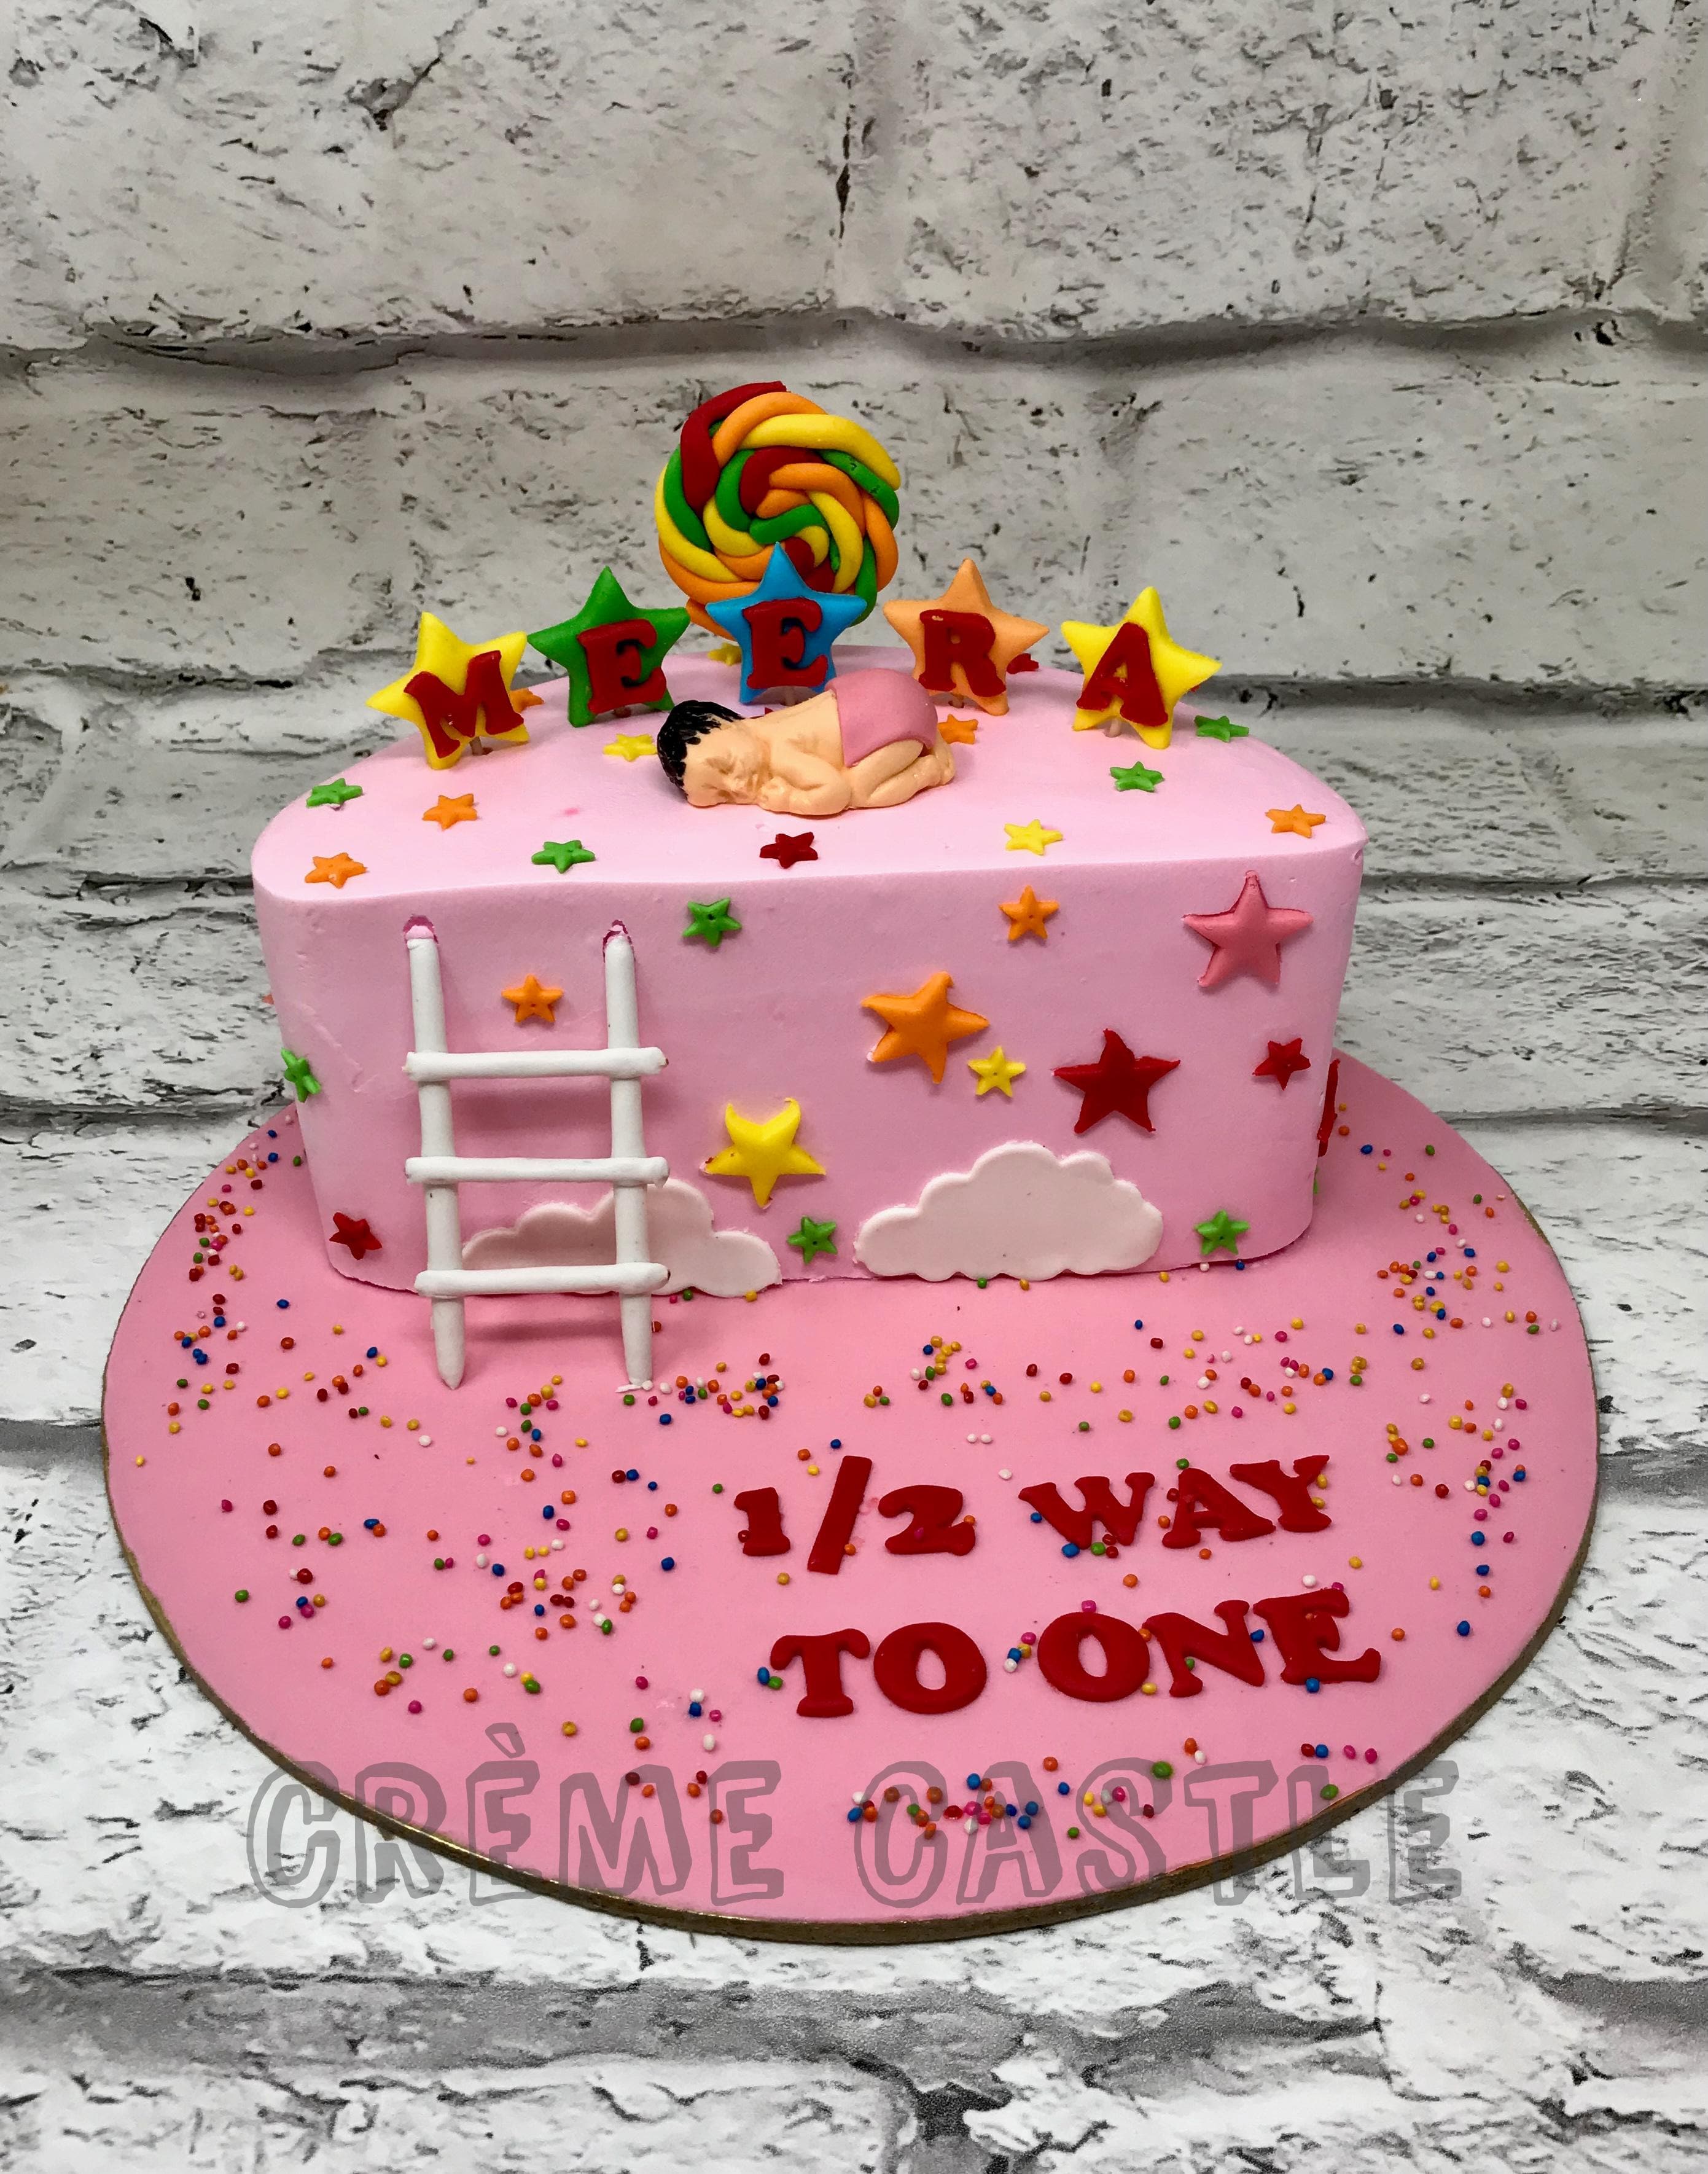 A Half Birthday Cake Tutorial & 6 Months with Her Daily Bread! - Wood &  Spoon